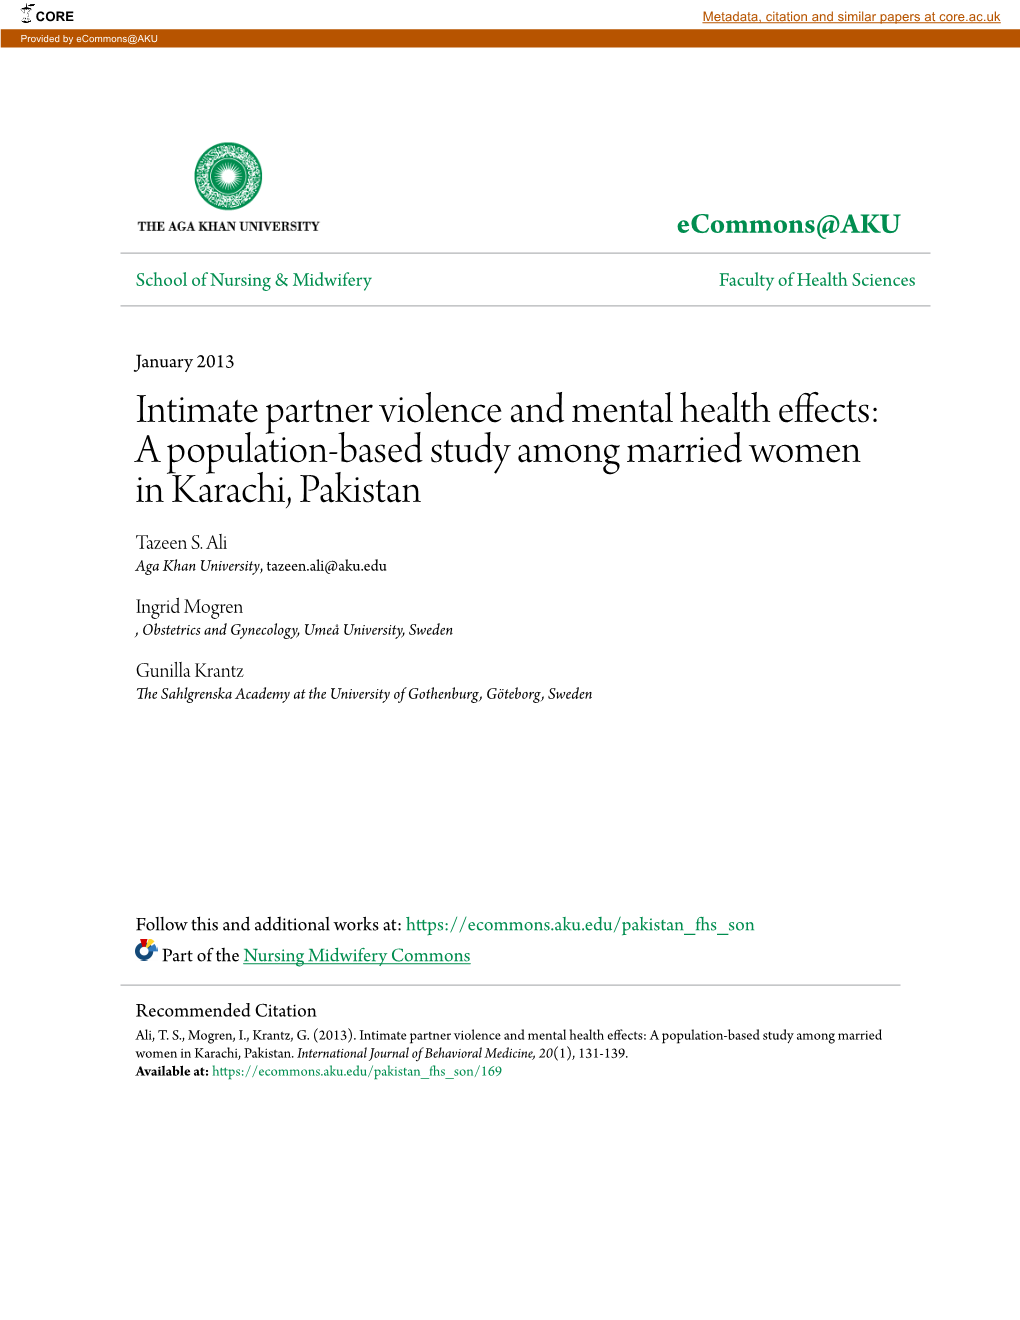 Intimate Partner Violence and Mental Health Effects: a Population-Based Study Among Married Women in Karachi, Pakistan Tazeen S